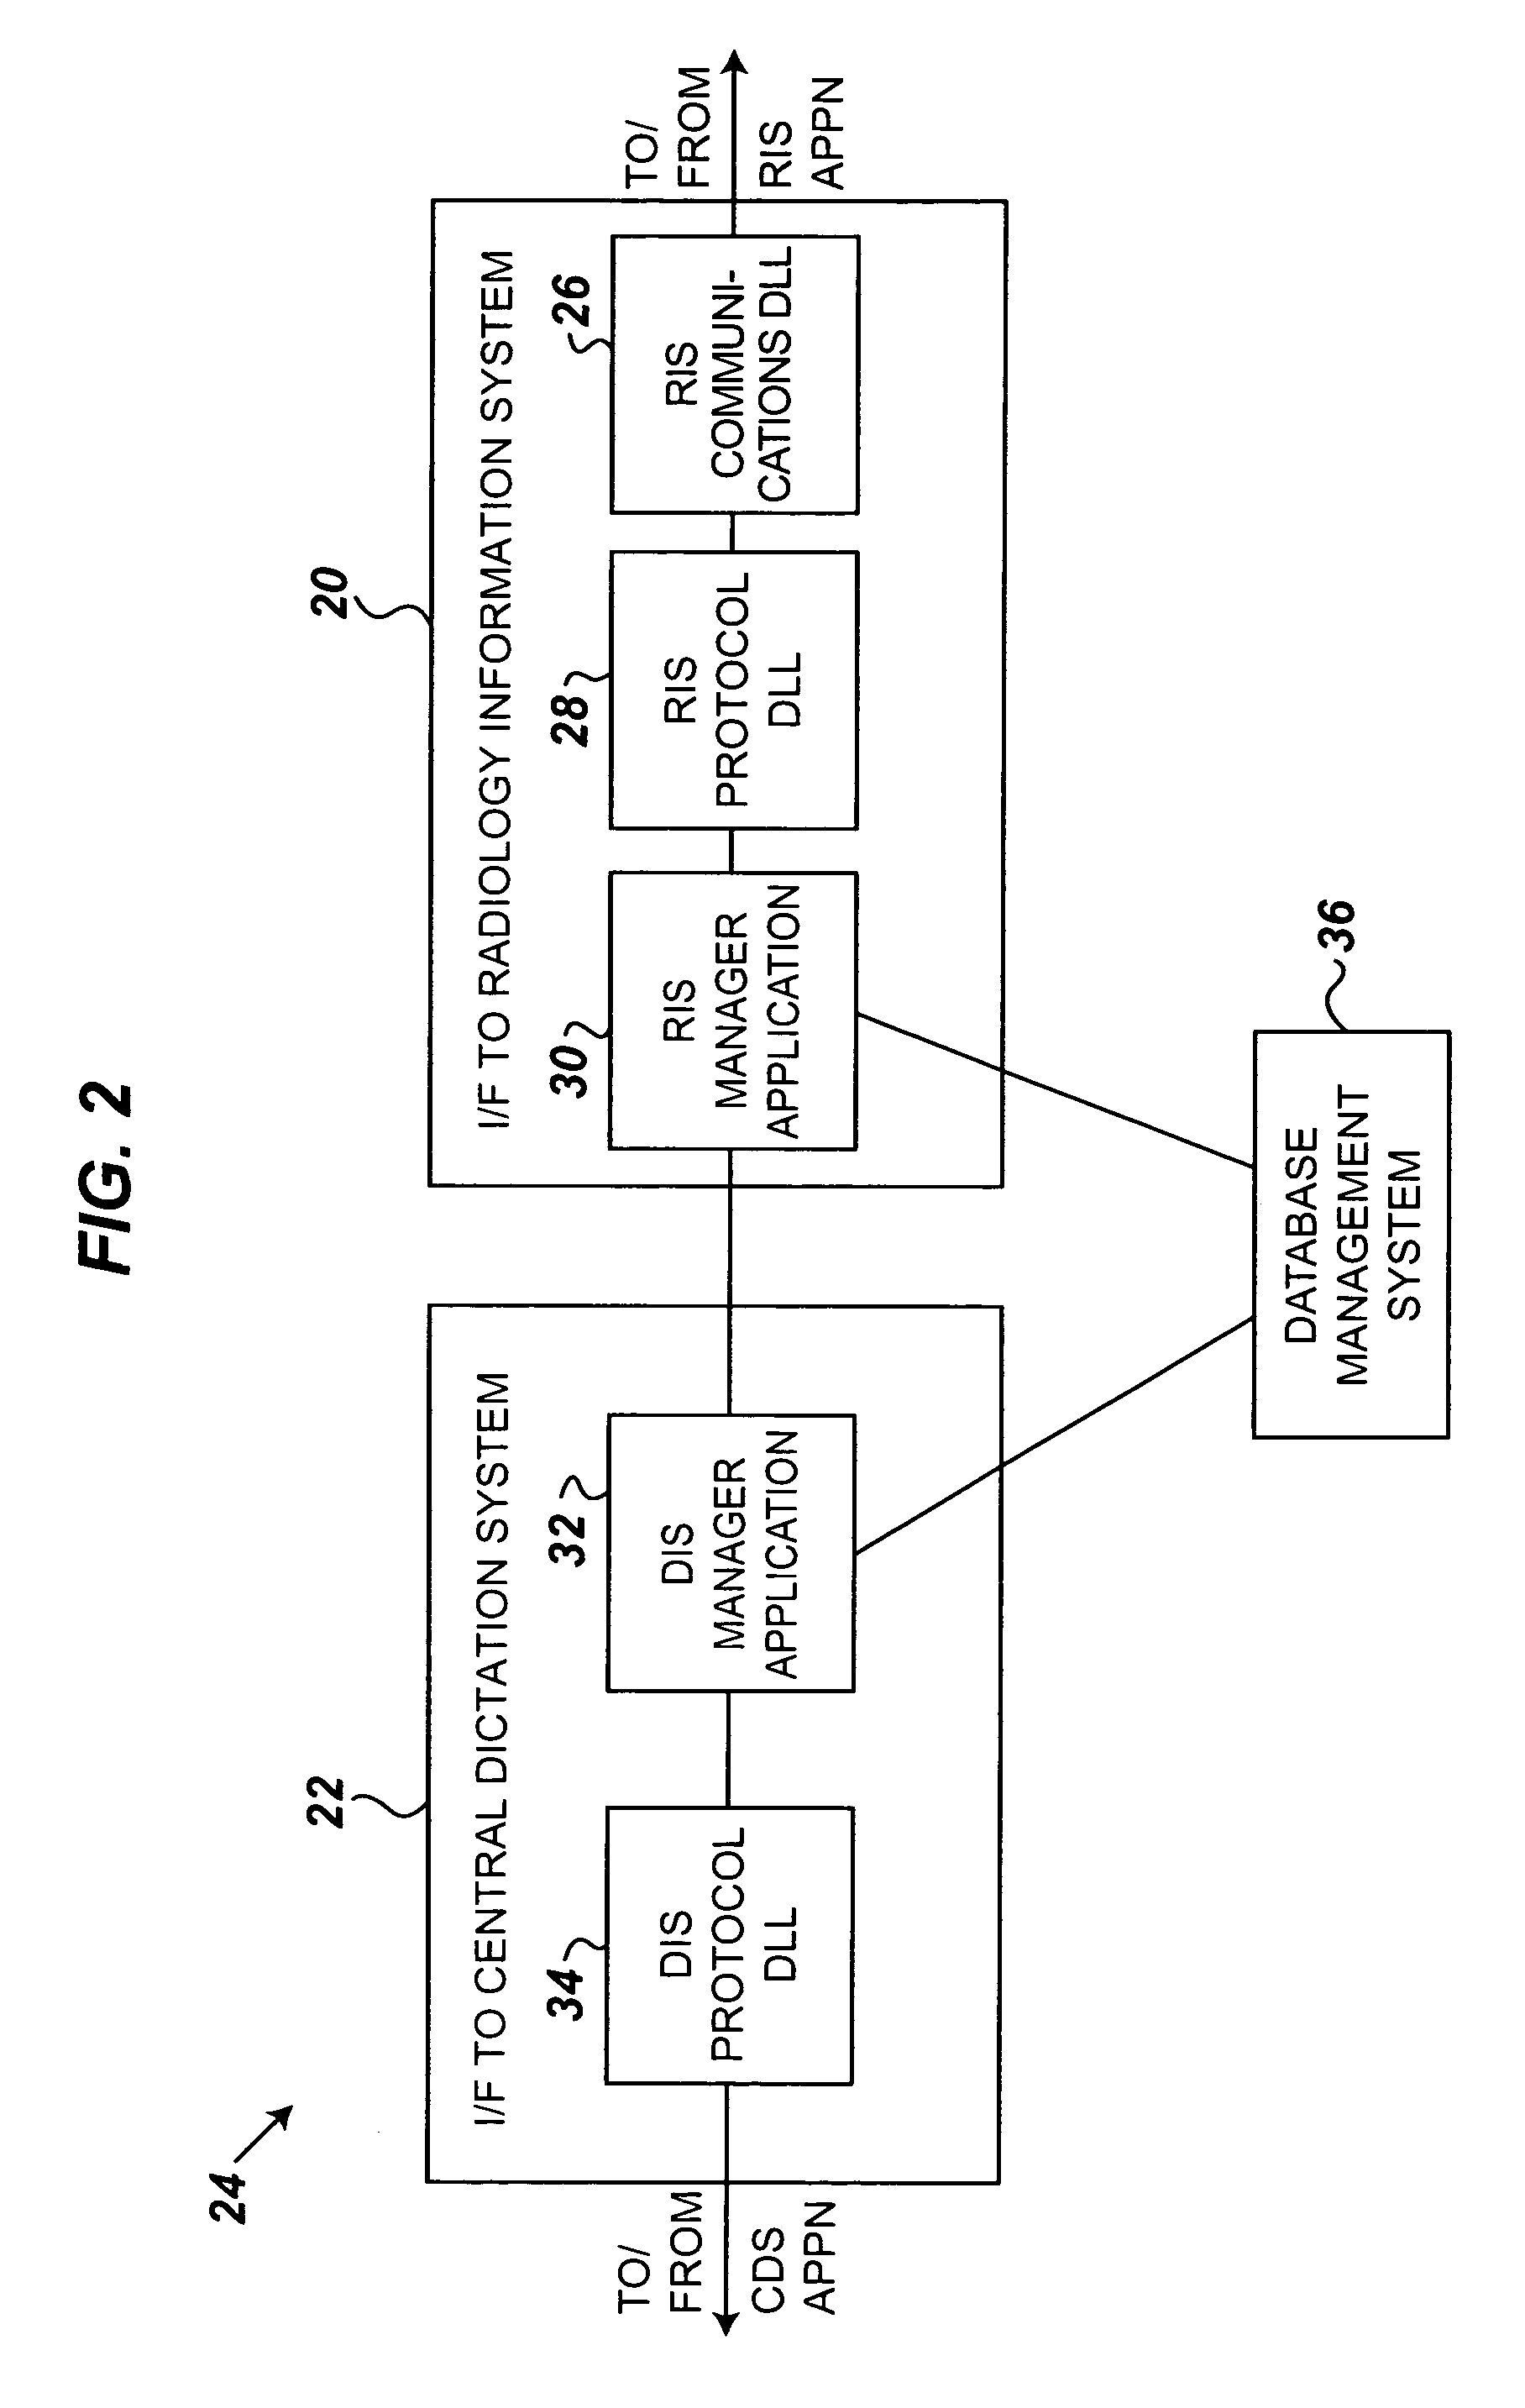 System and method for interfacing a radiology information system to a central dictation system